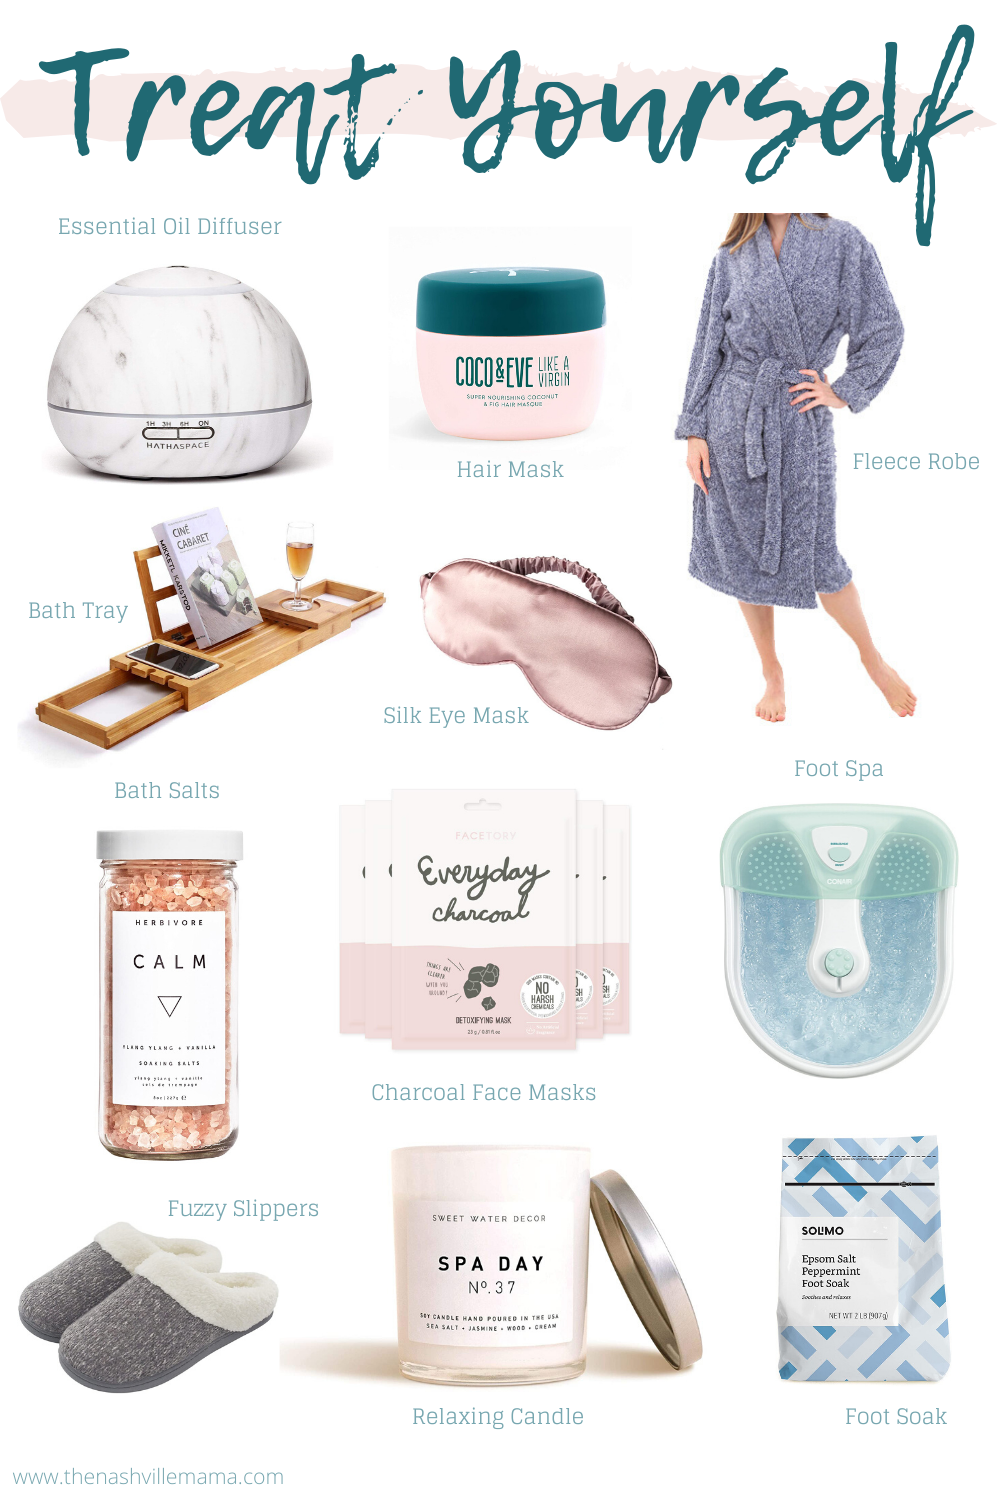 Treat Yourself - At Home Spa Day Essentials - Treat Yourself - At Home Spa Day Essentials -   16 beauty Skin spa ideas